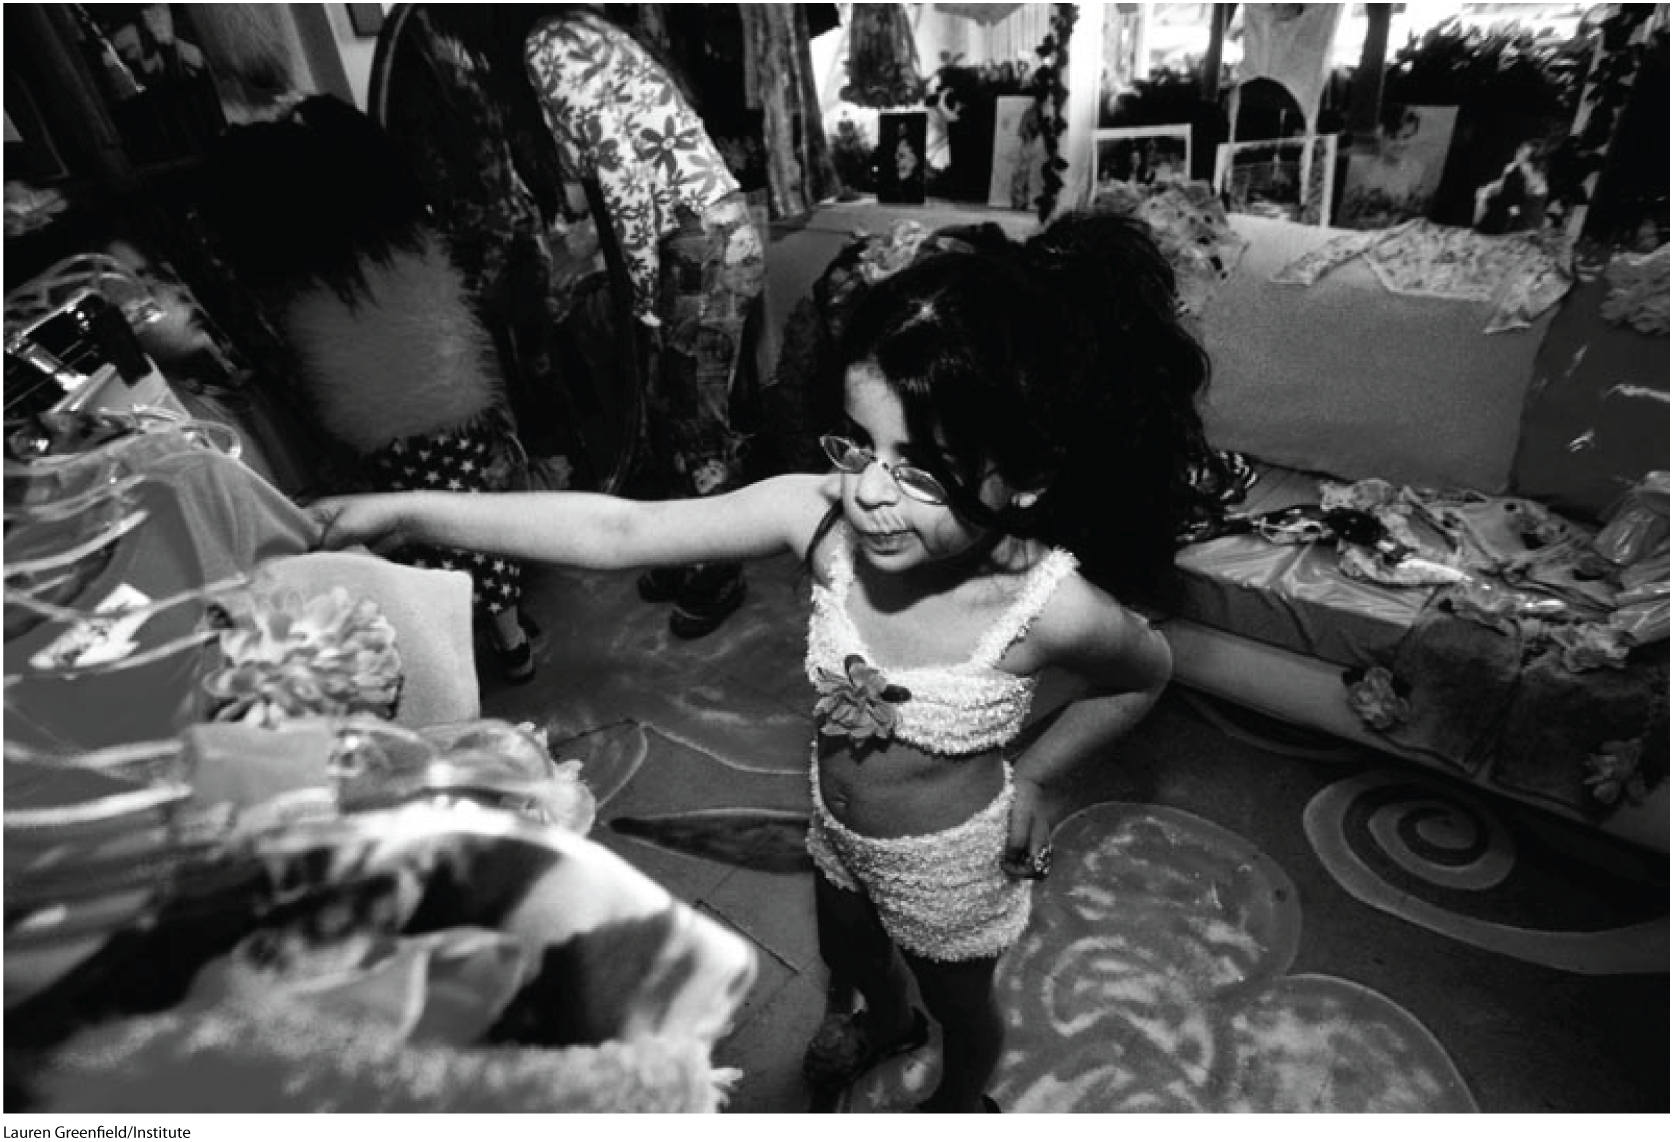 A black and white photo shows a small girl choosing a dress from a wardrobe.